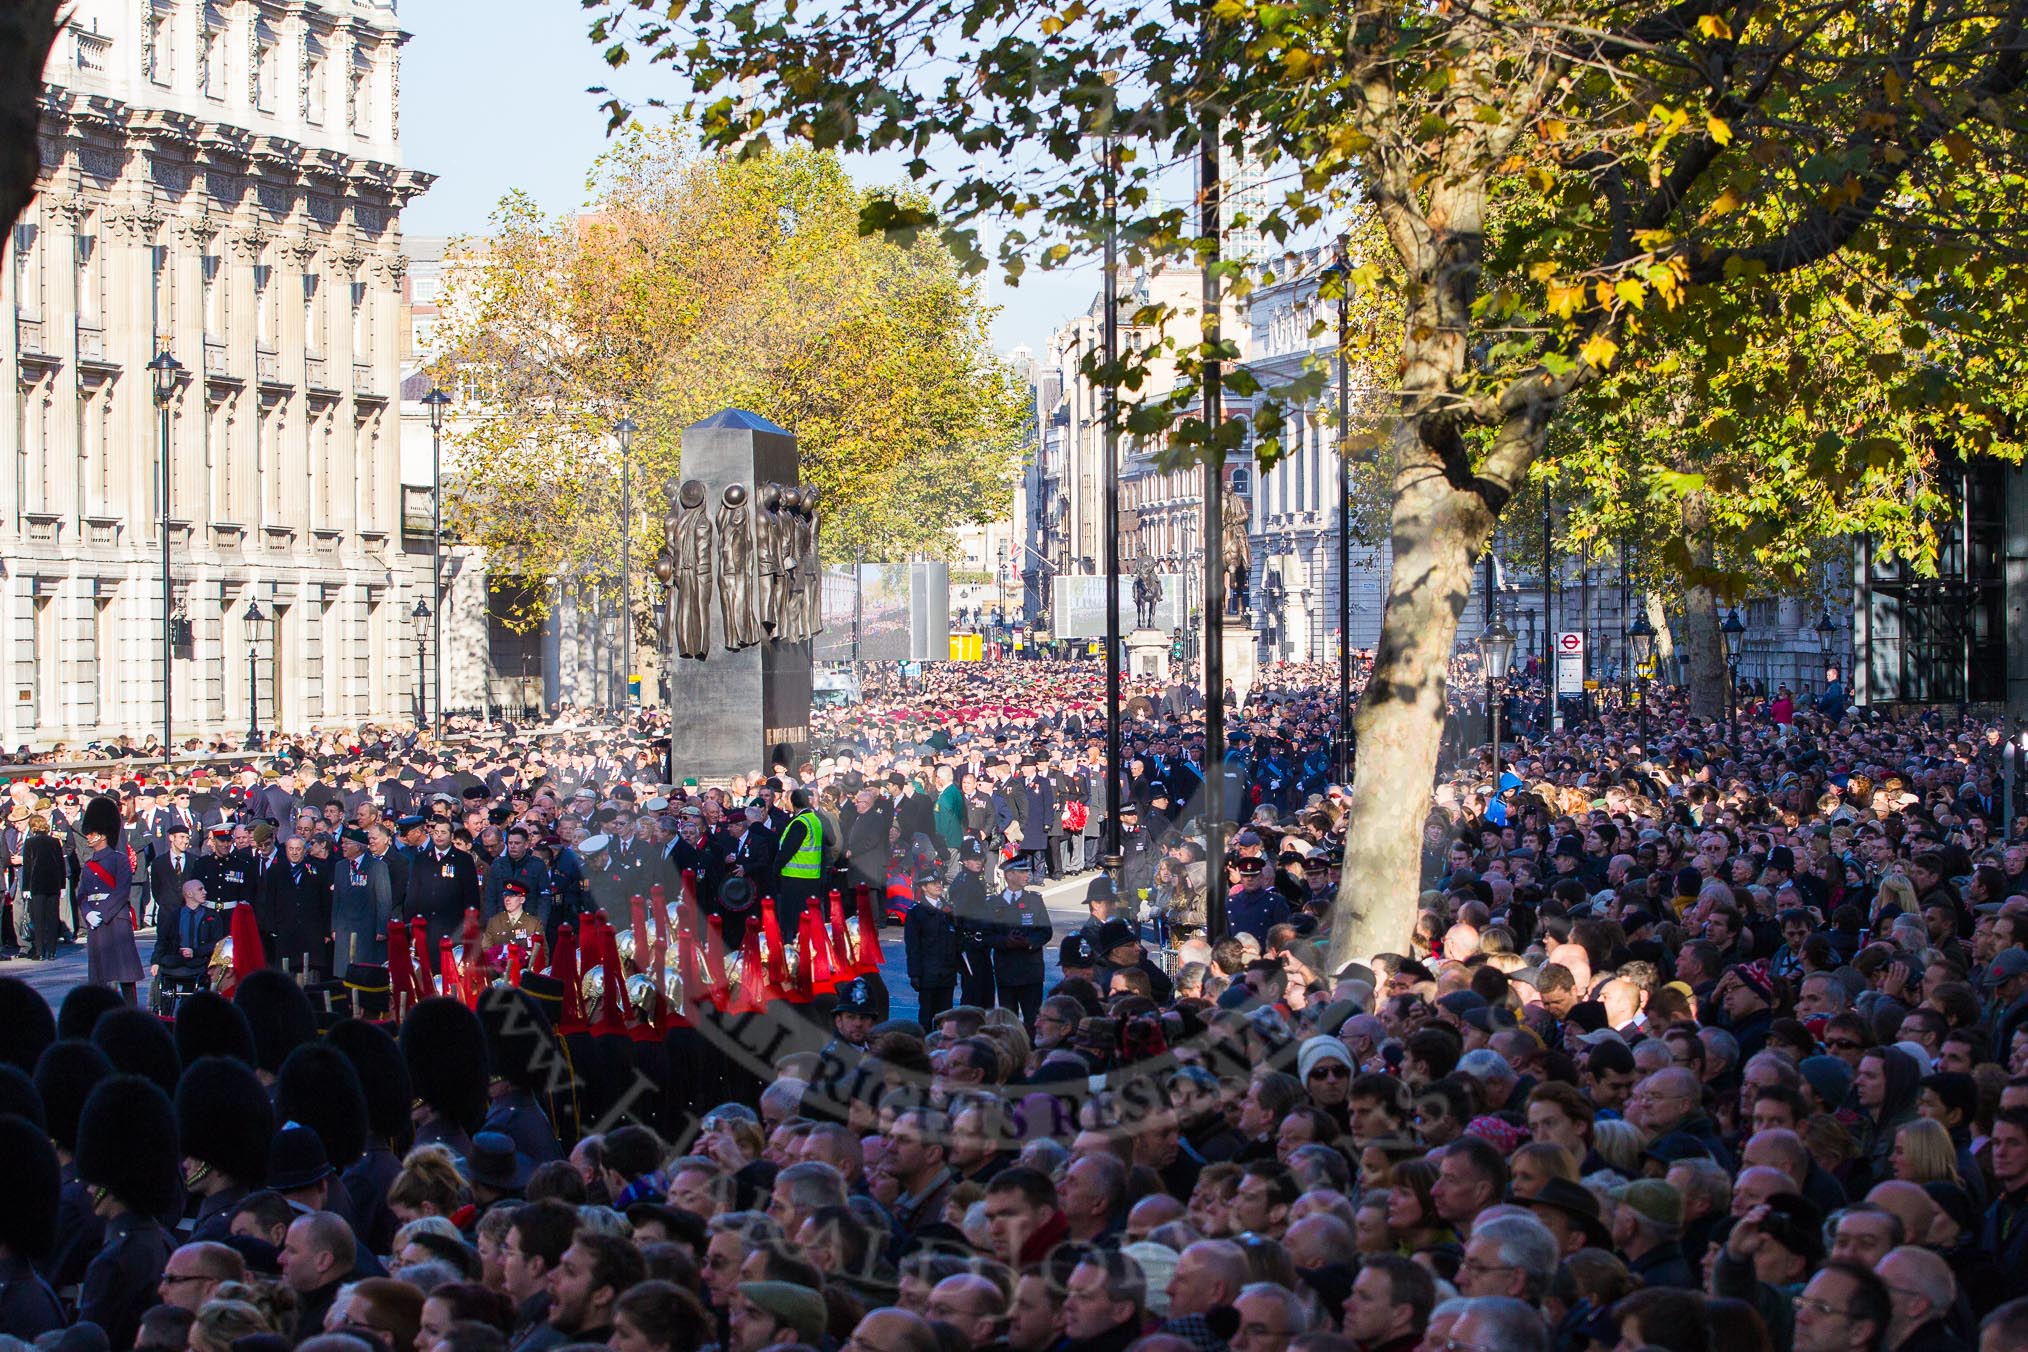 10:36am - Whitehall is now crowded with spectators on both sides, and long rows of ex-Servicemen and women inbetween.